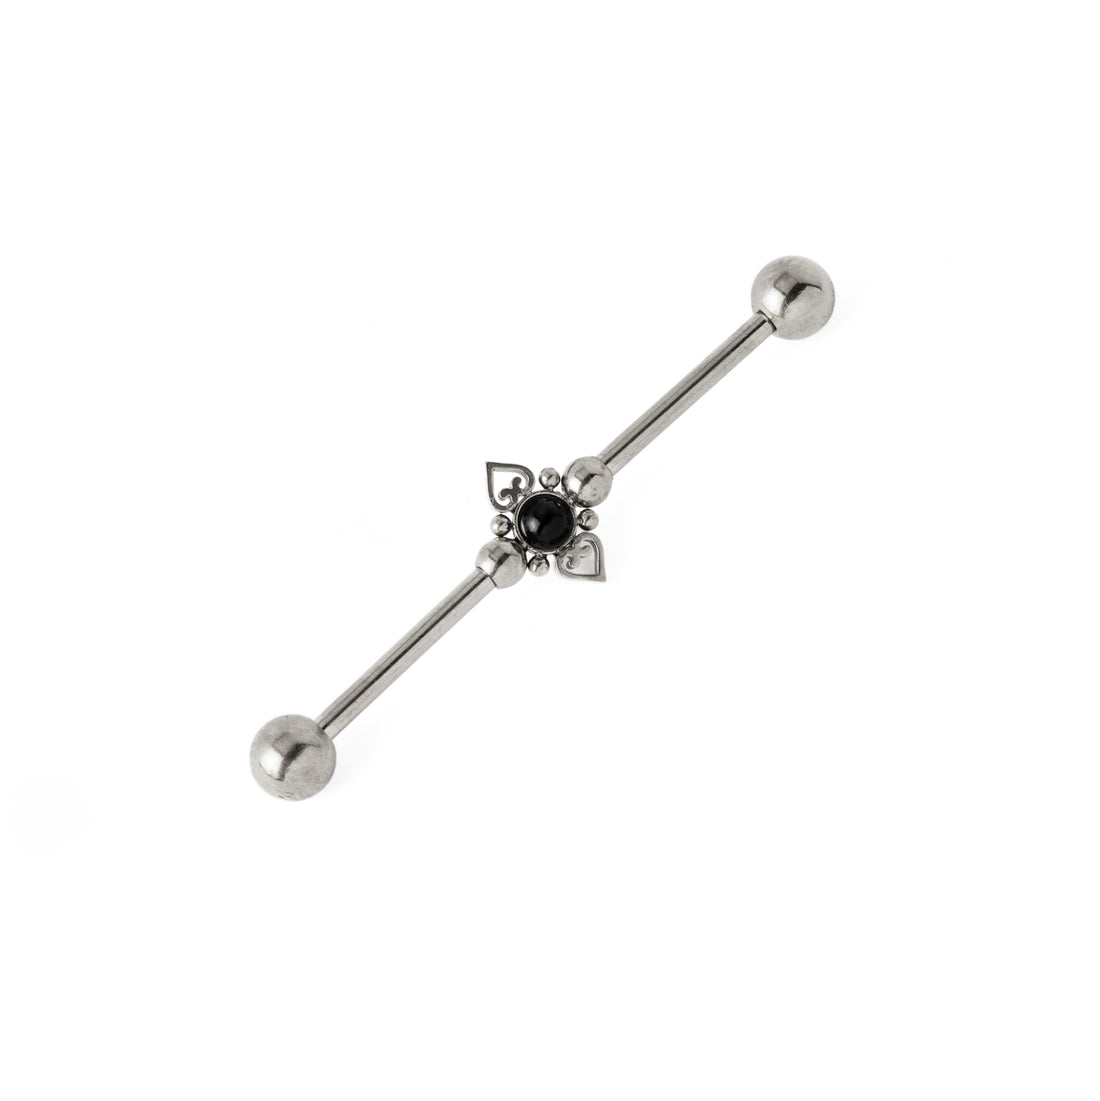 Neptune Industrial Barbell with Onyx right side view